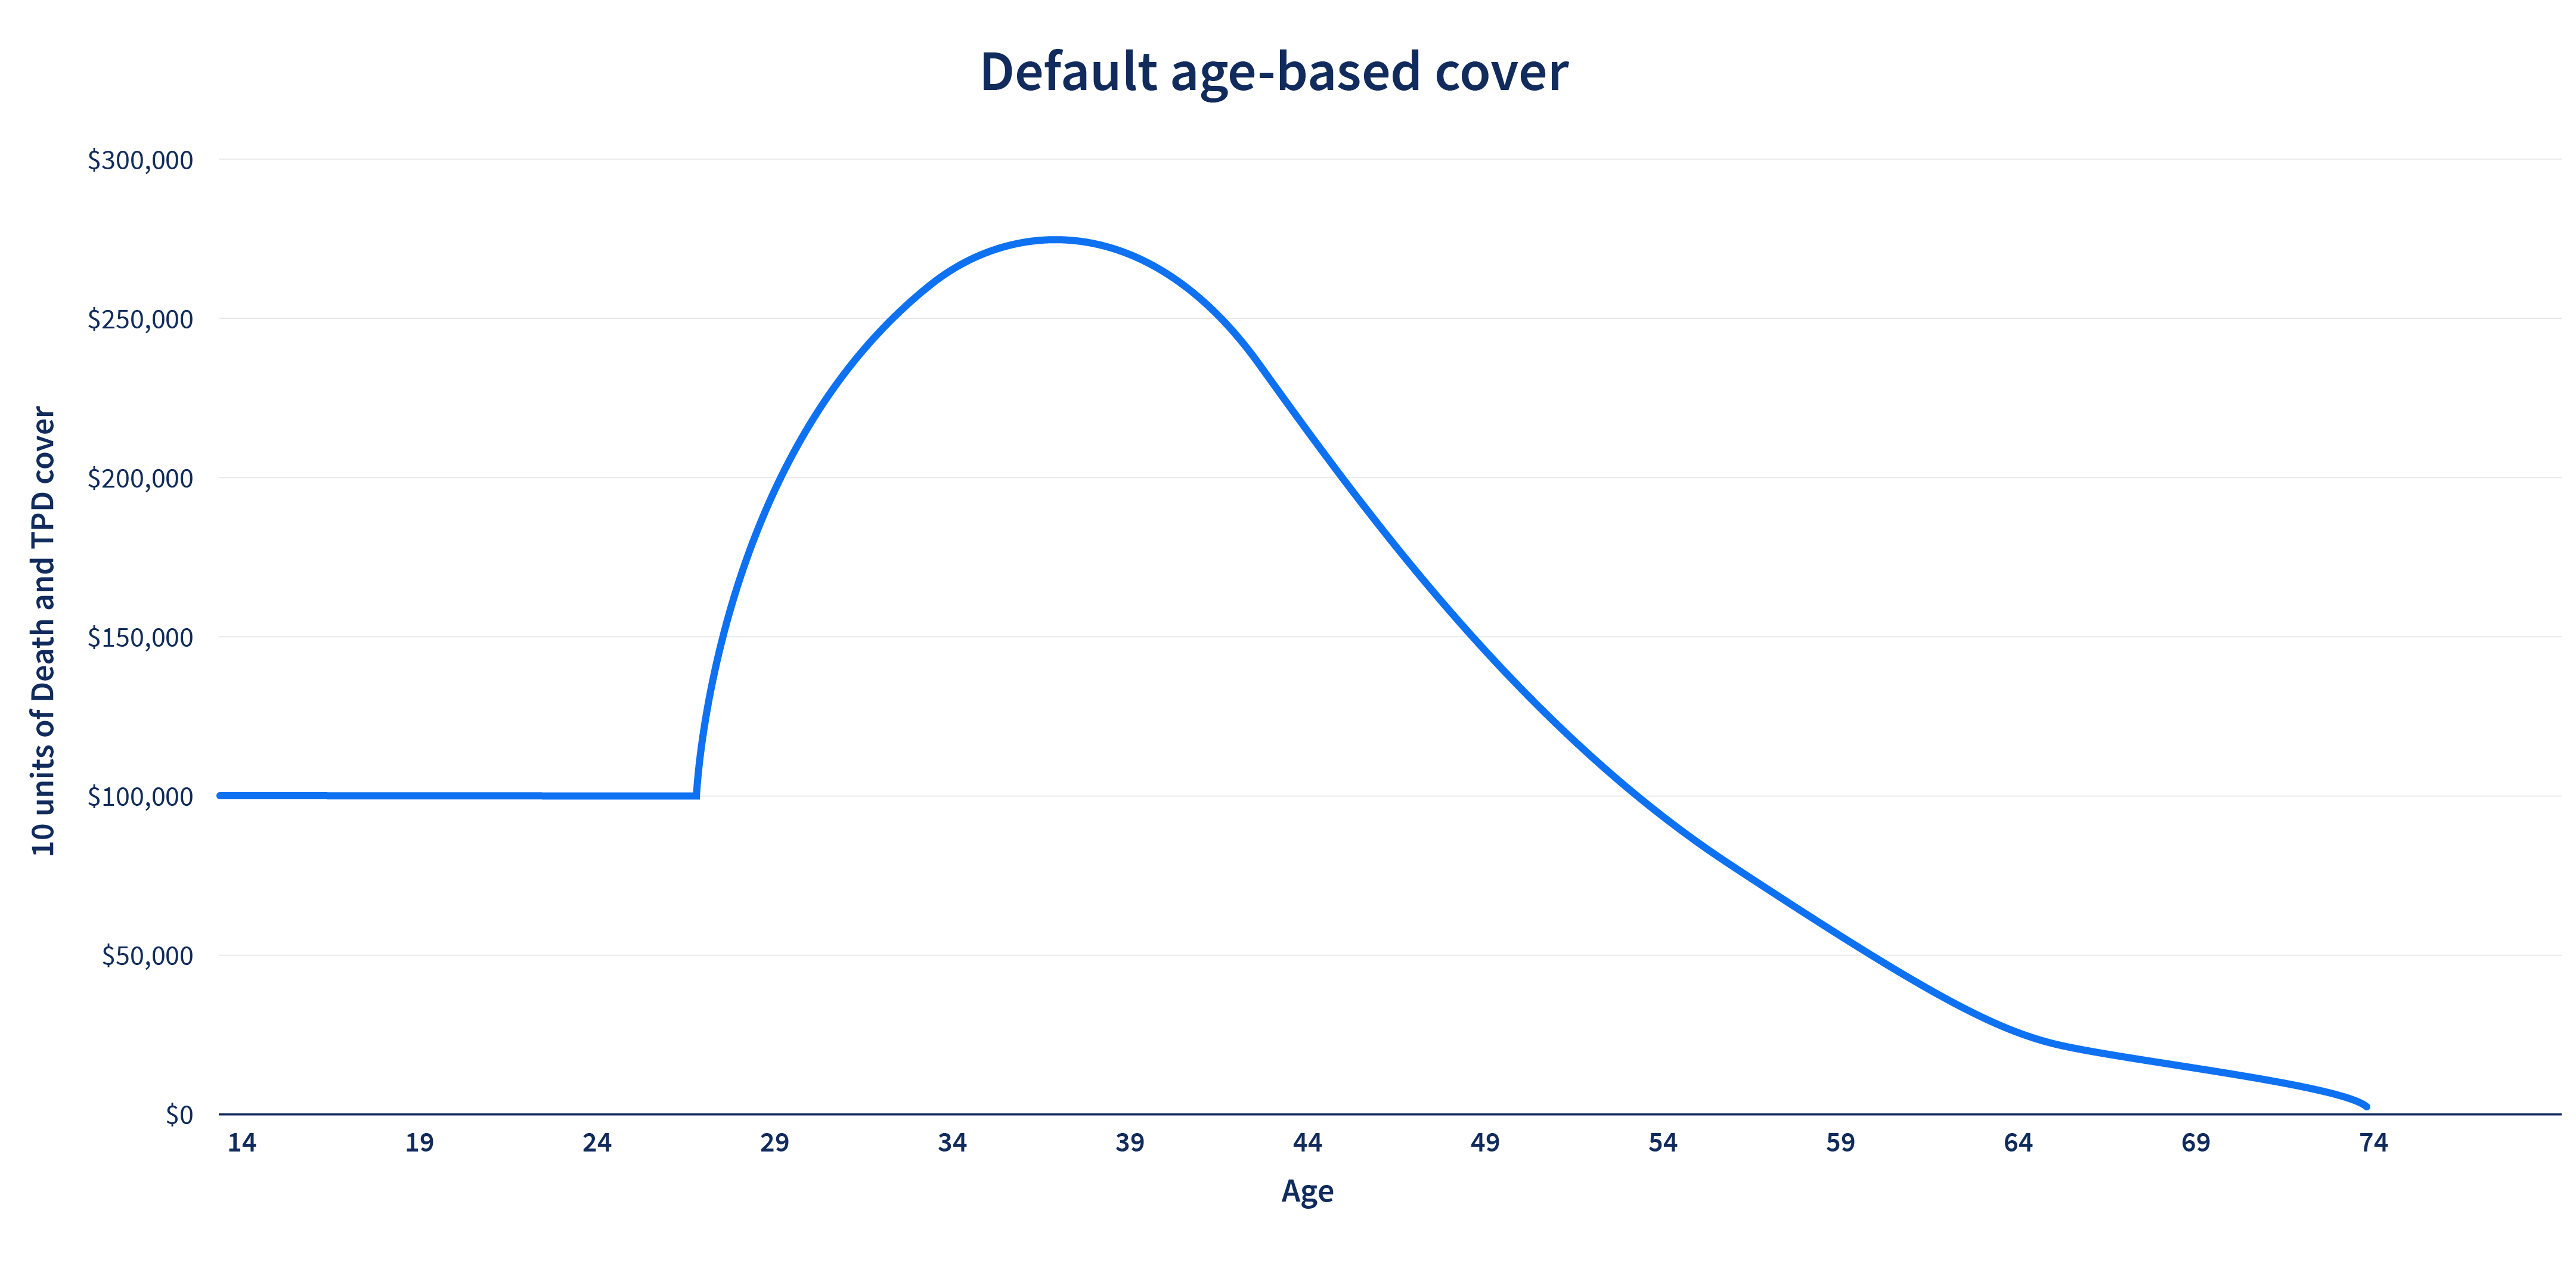 How cover amounts change as you age